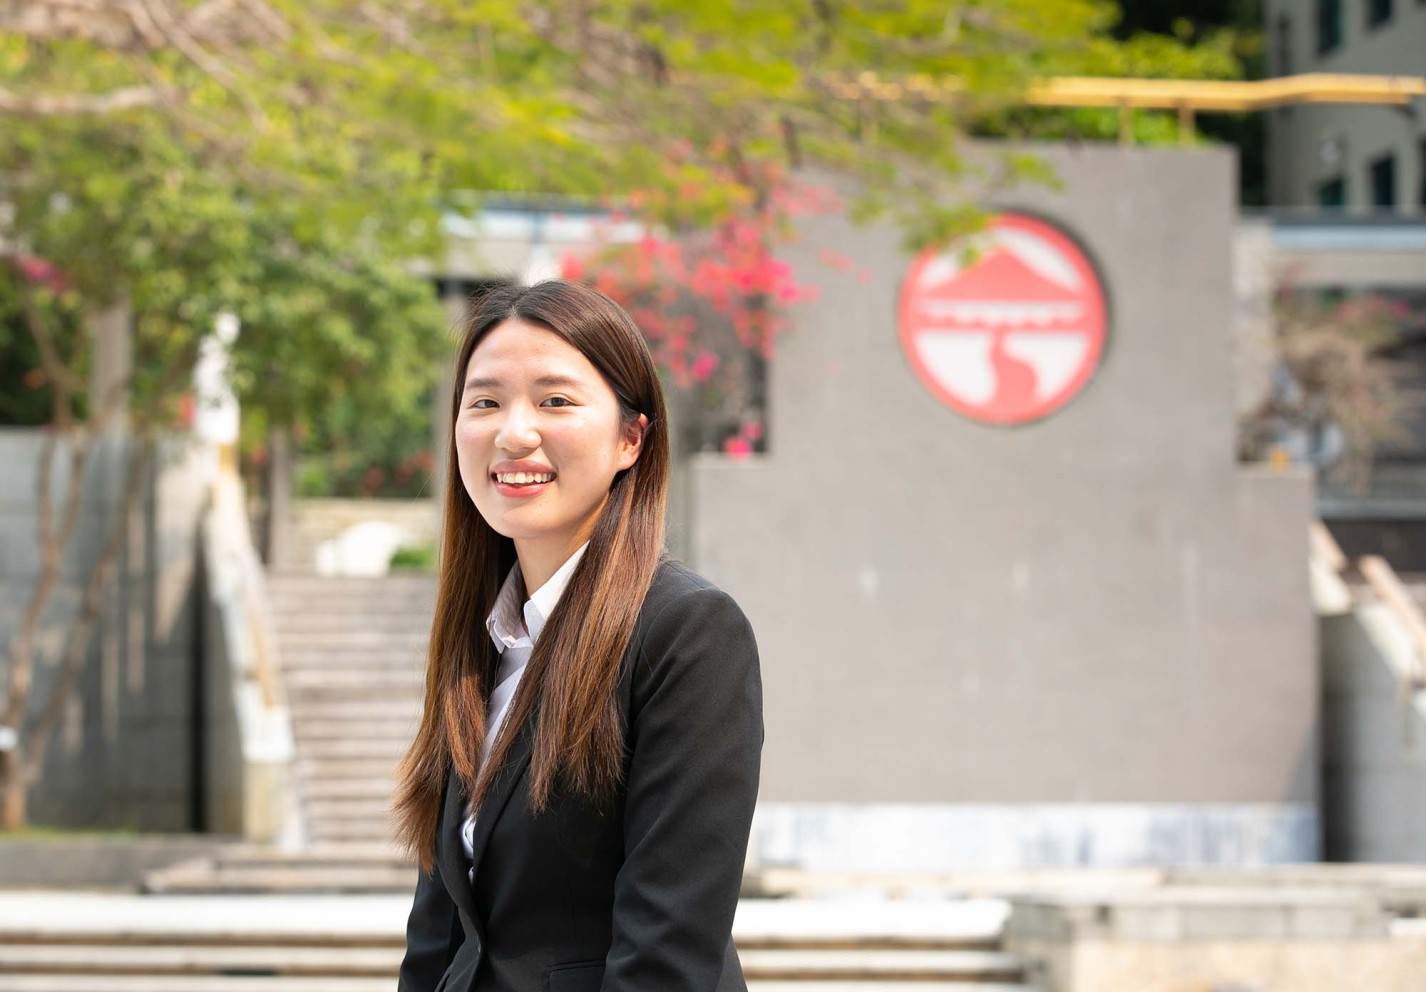 Winner of the Sir Edward Youde Memorial Scholarship Joanne Cheung plans to start social enterprise to help the needy  